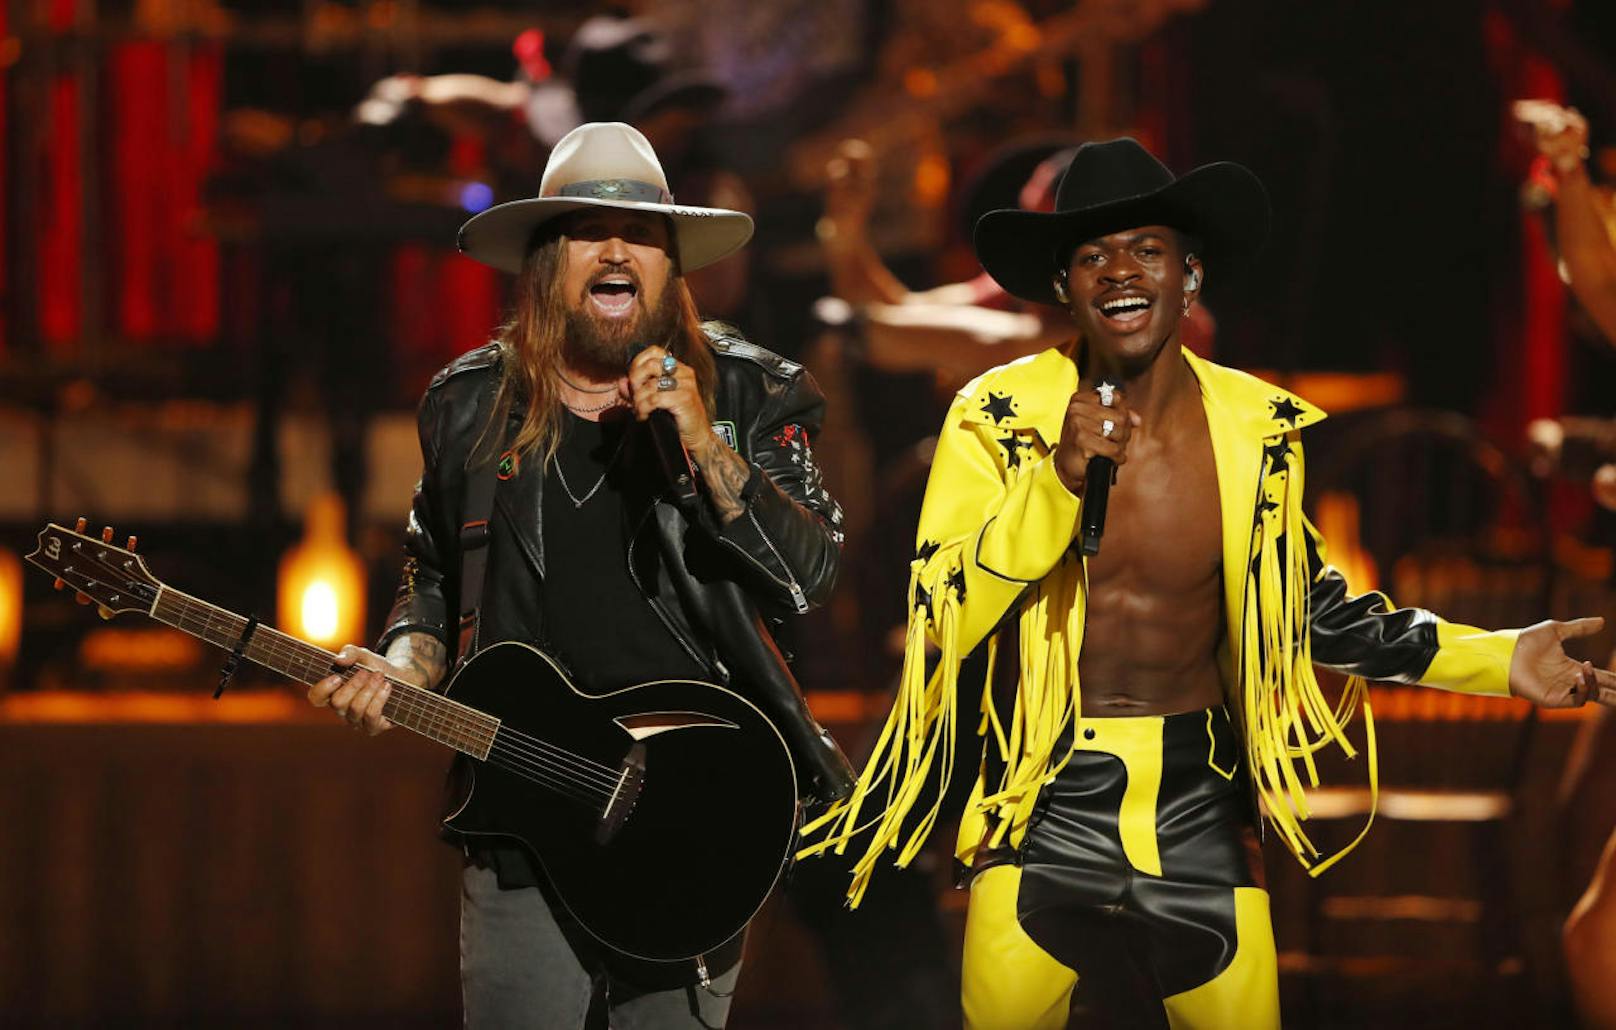 6. "Old Town Road - Remix" - Billy Ray Cyrus & Lil Nas X